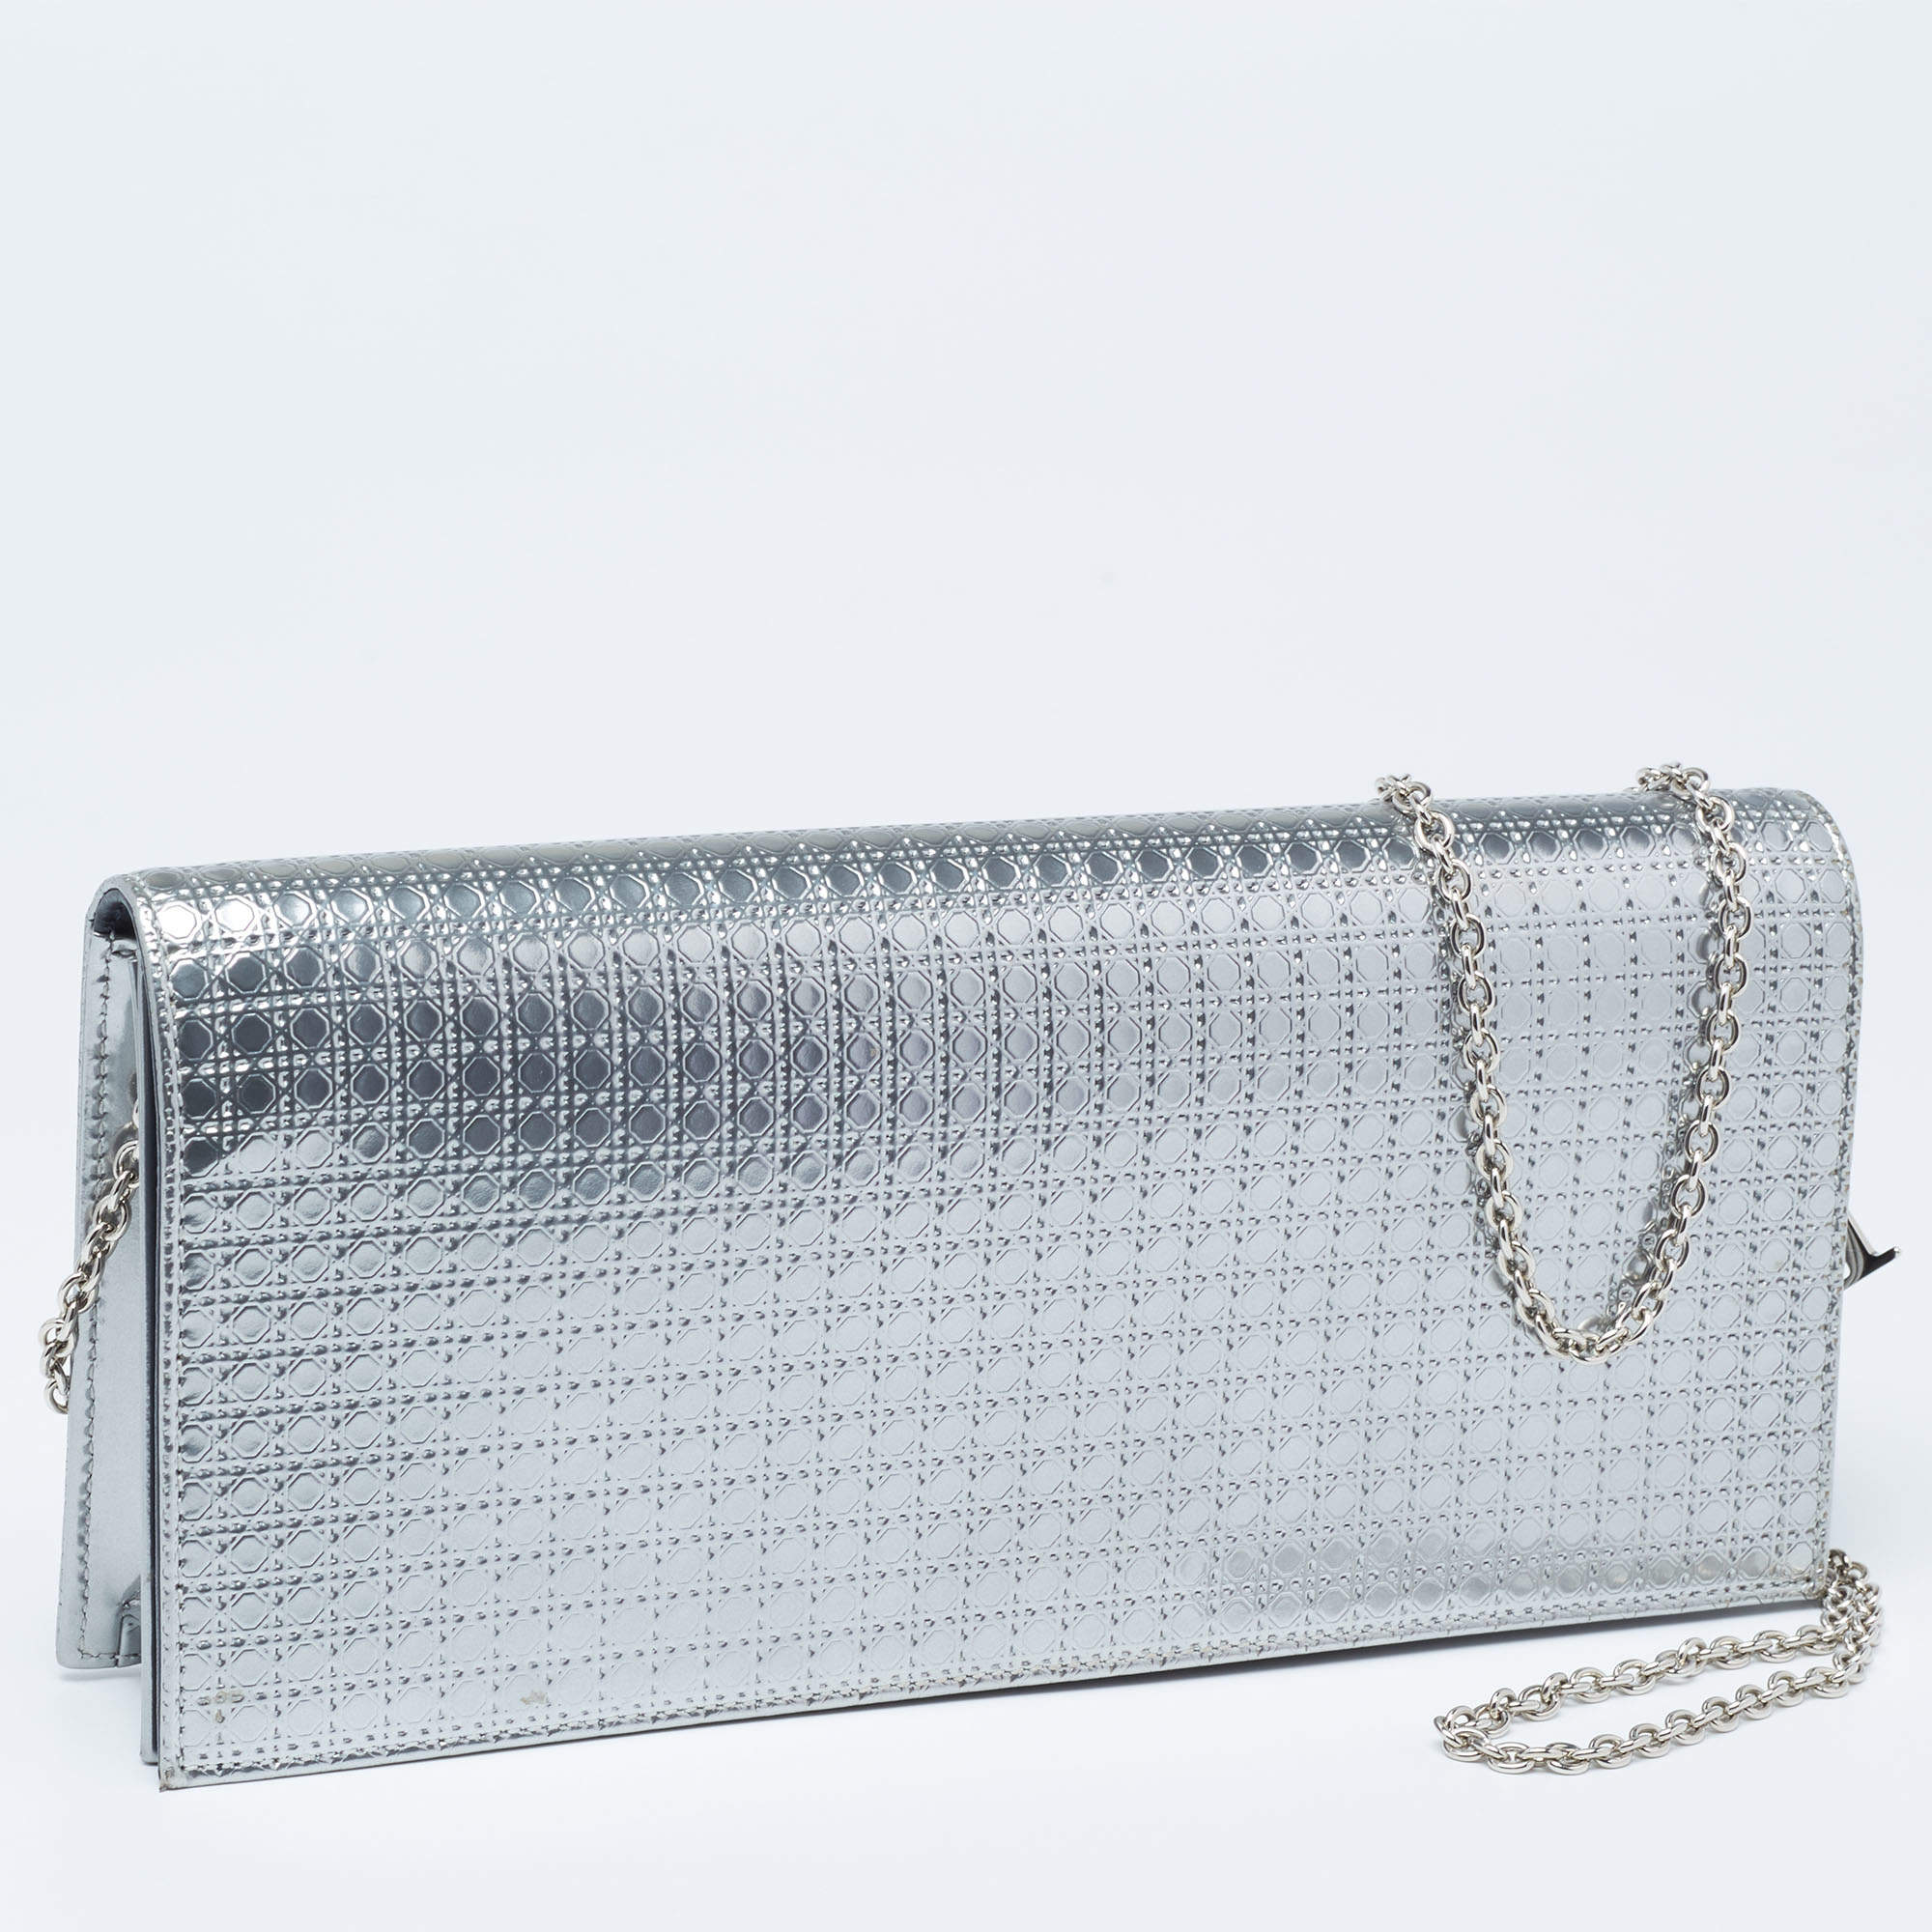 Christian Dior Lady Dior Croisiere Perforated Clutch in Silver — UFO No More